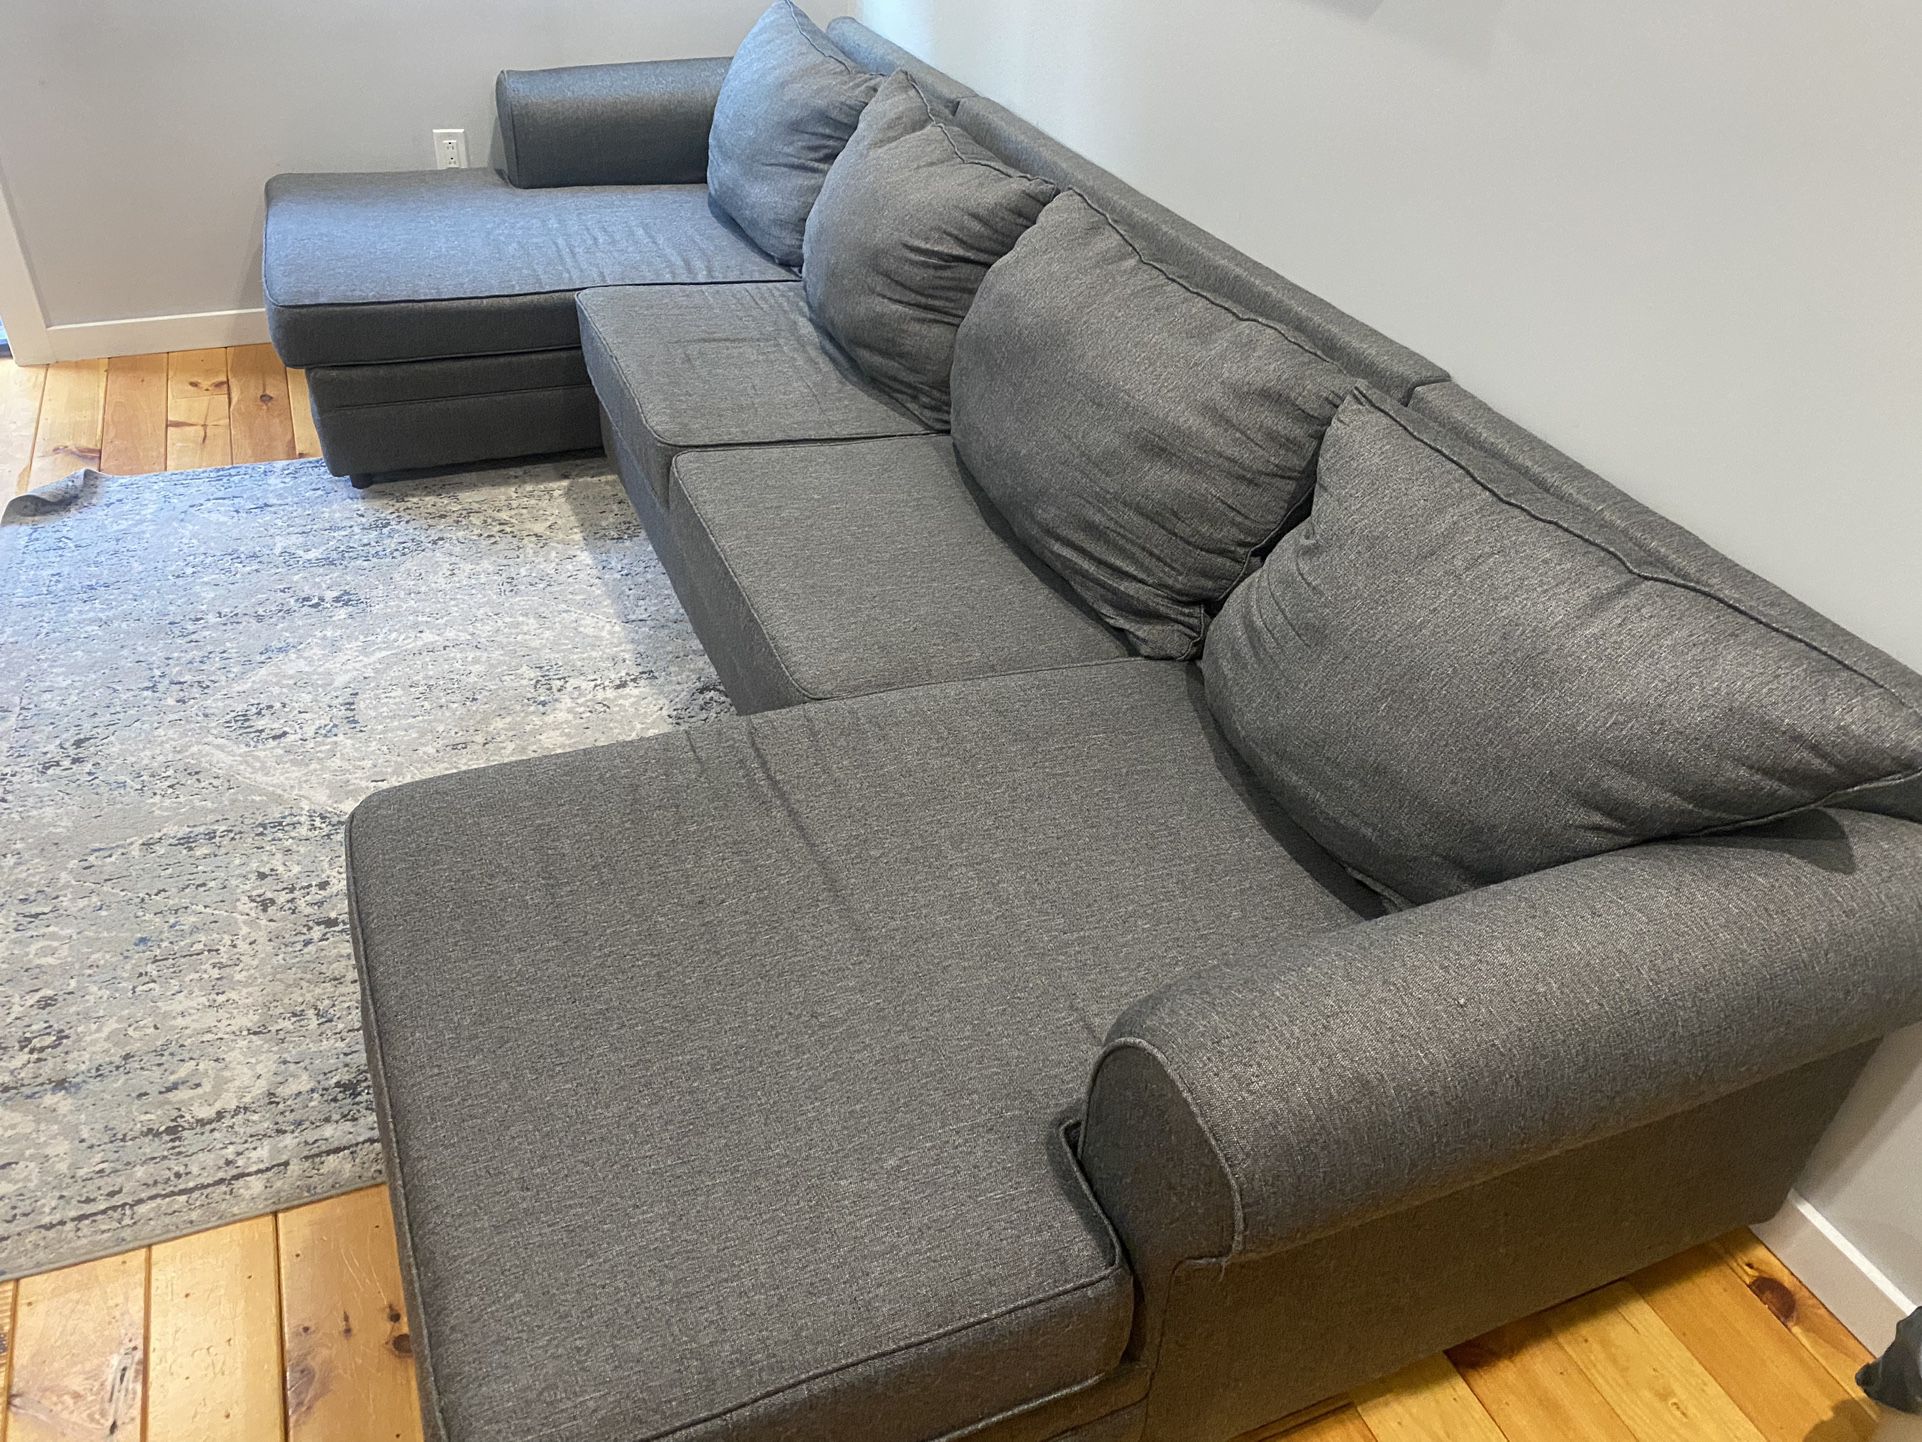 FREE DELIVERY AND INSTALLATION - Katie Gray 3 Piece Double Face Chaise Sectional Bob’s Furniture